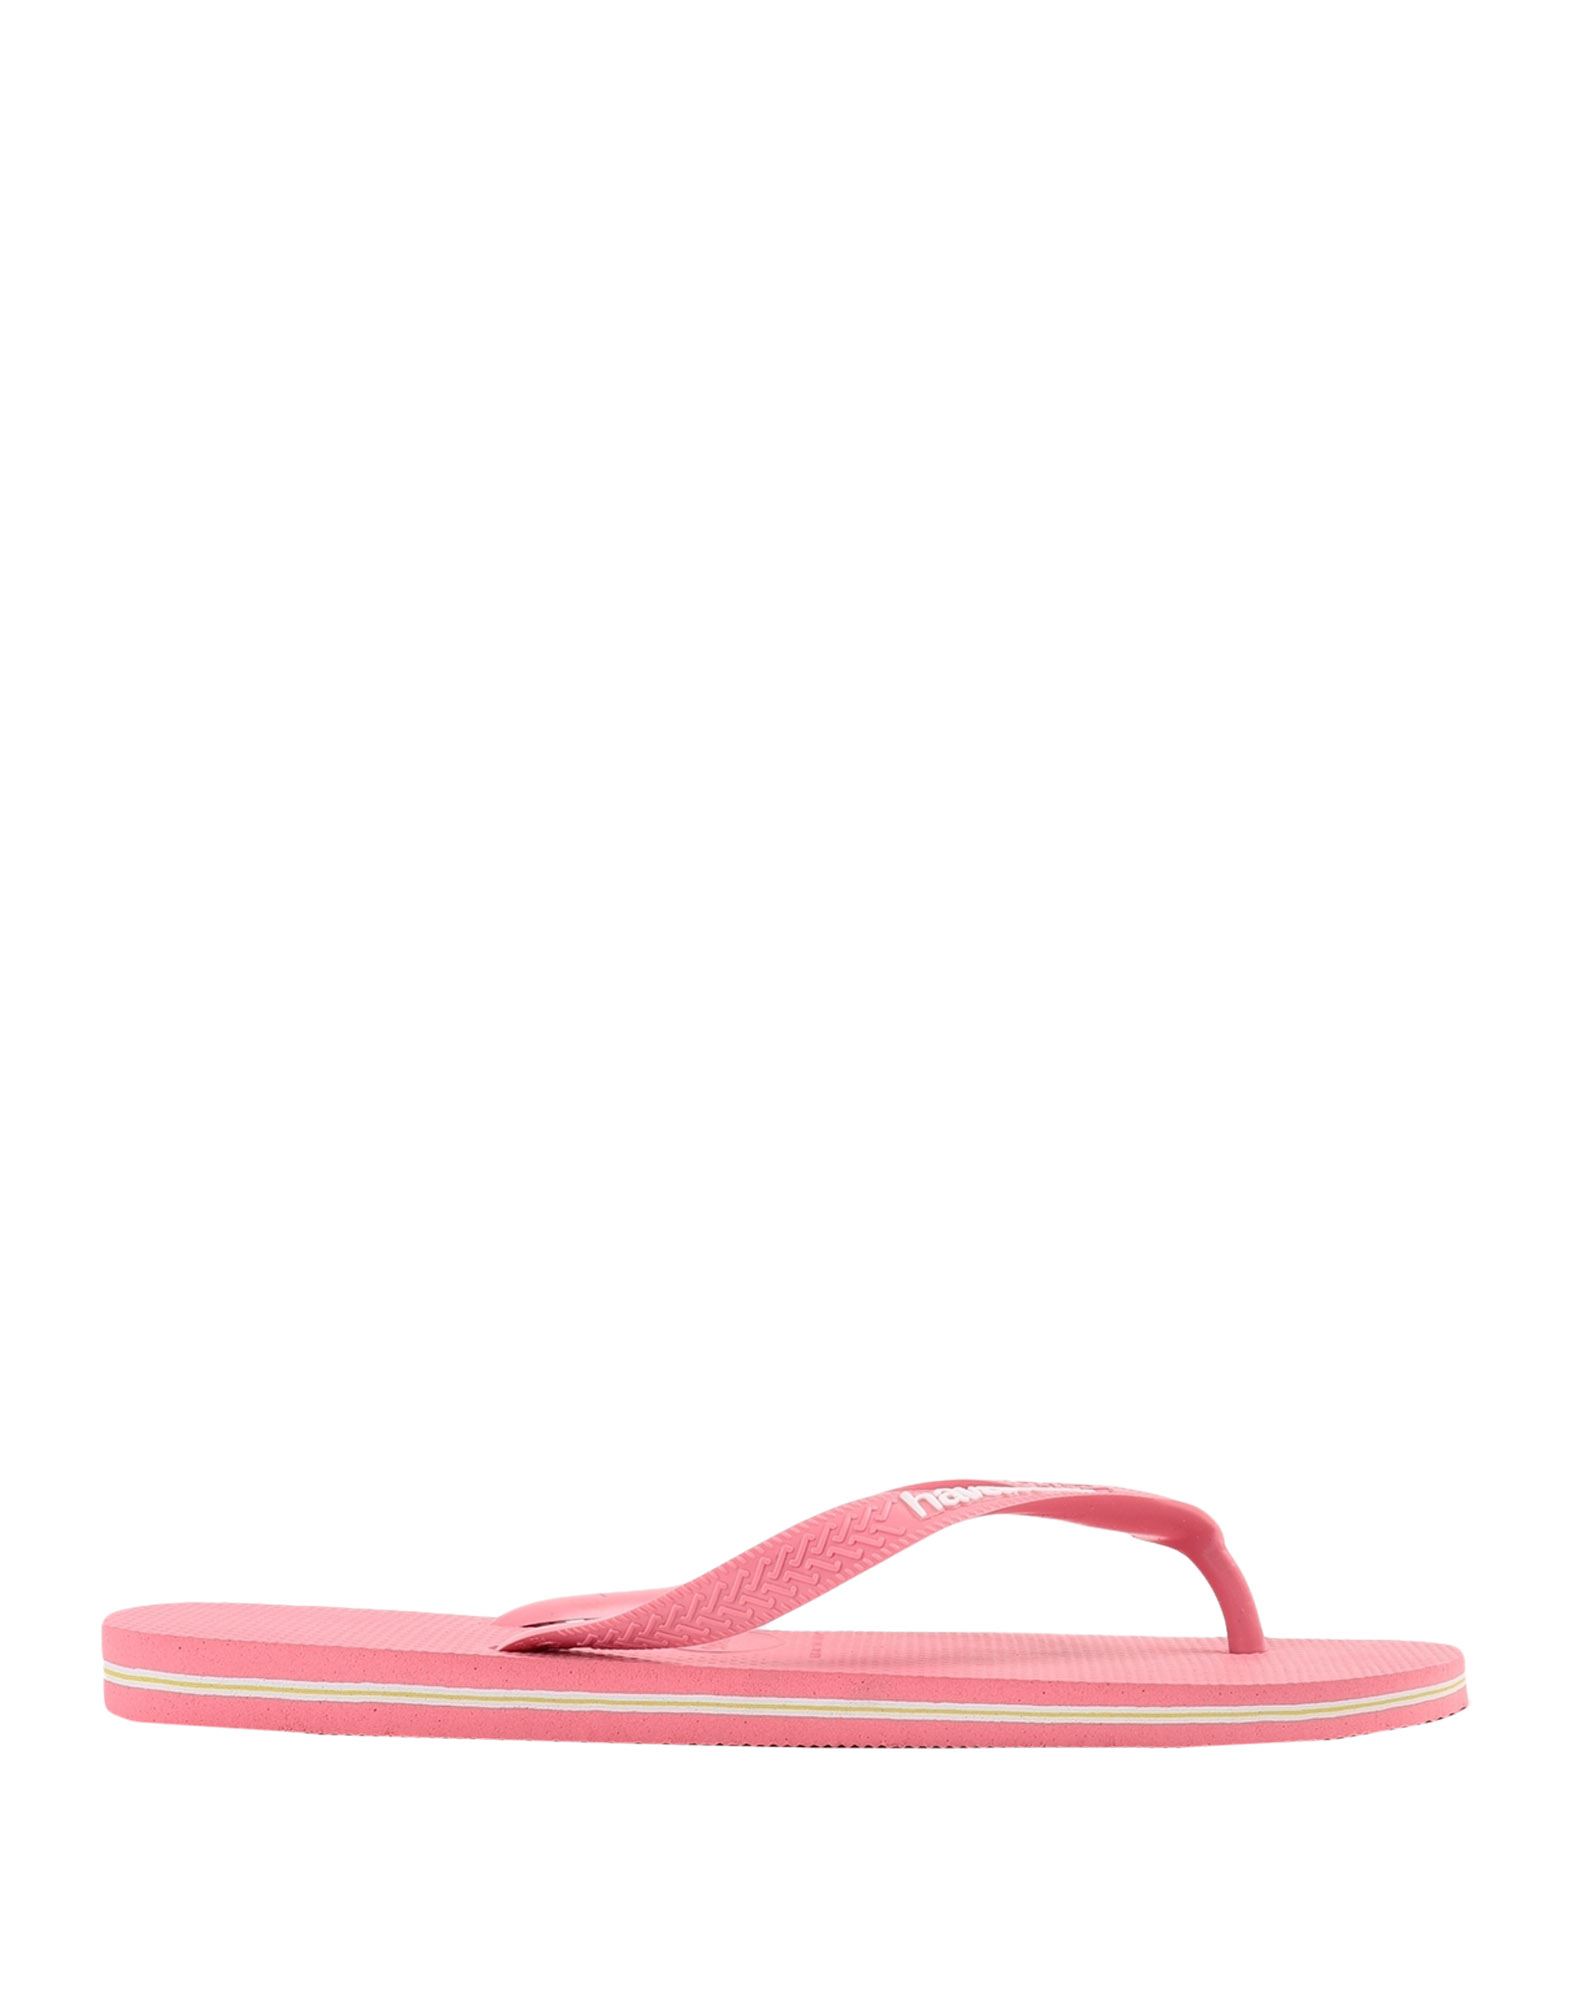 Shop Havaianas Woman Thong Sandal Coral Size 7/8 Rubber In Red